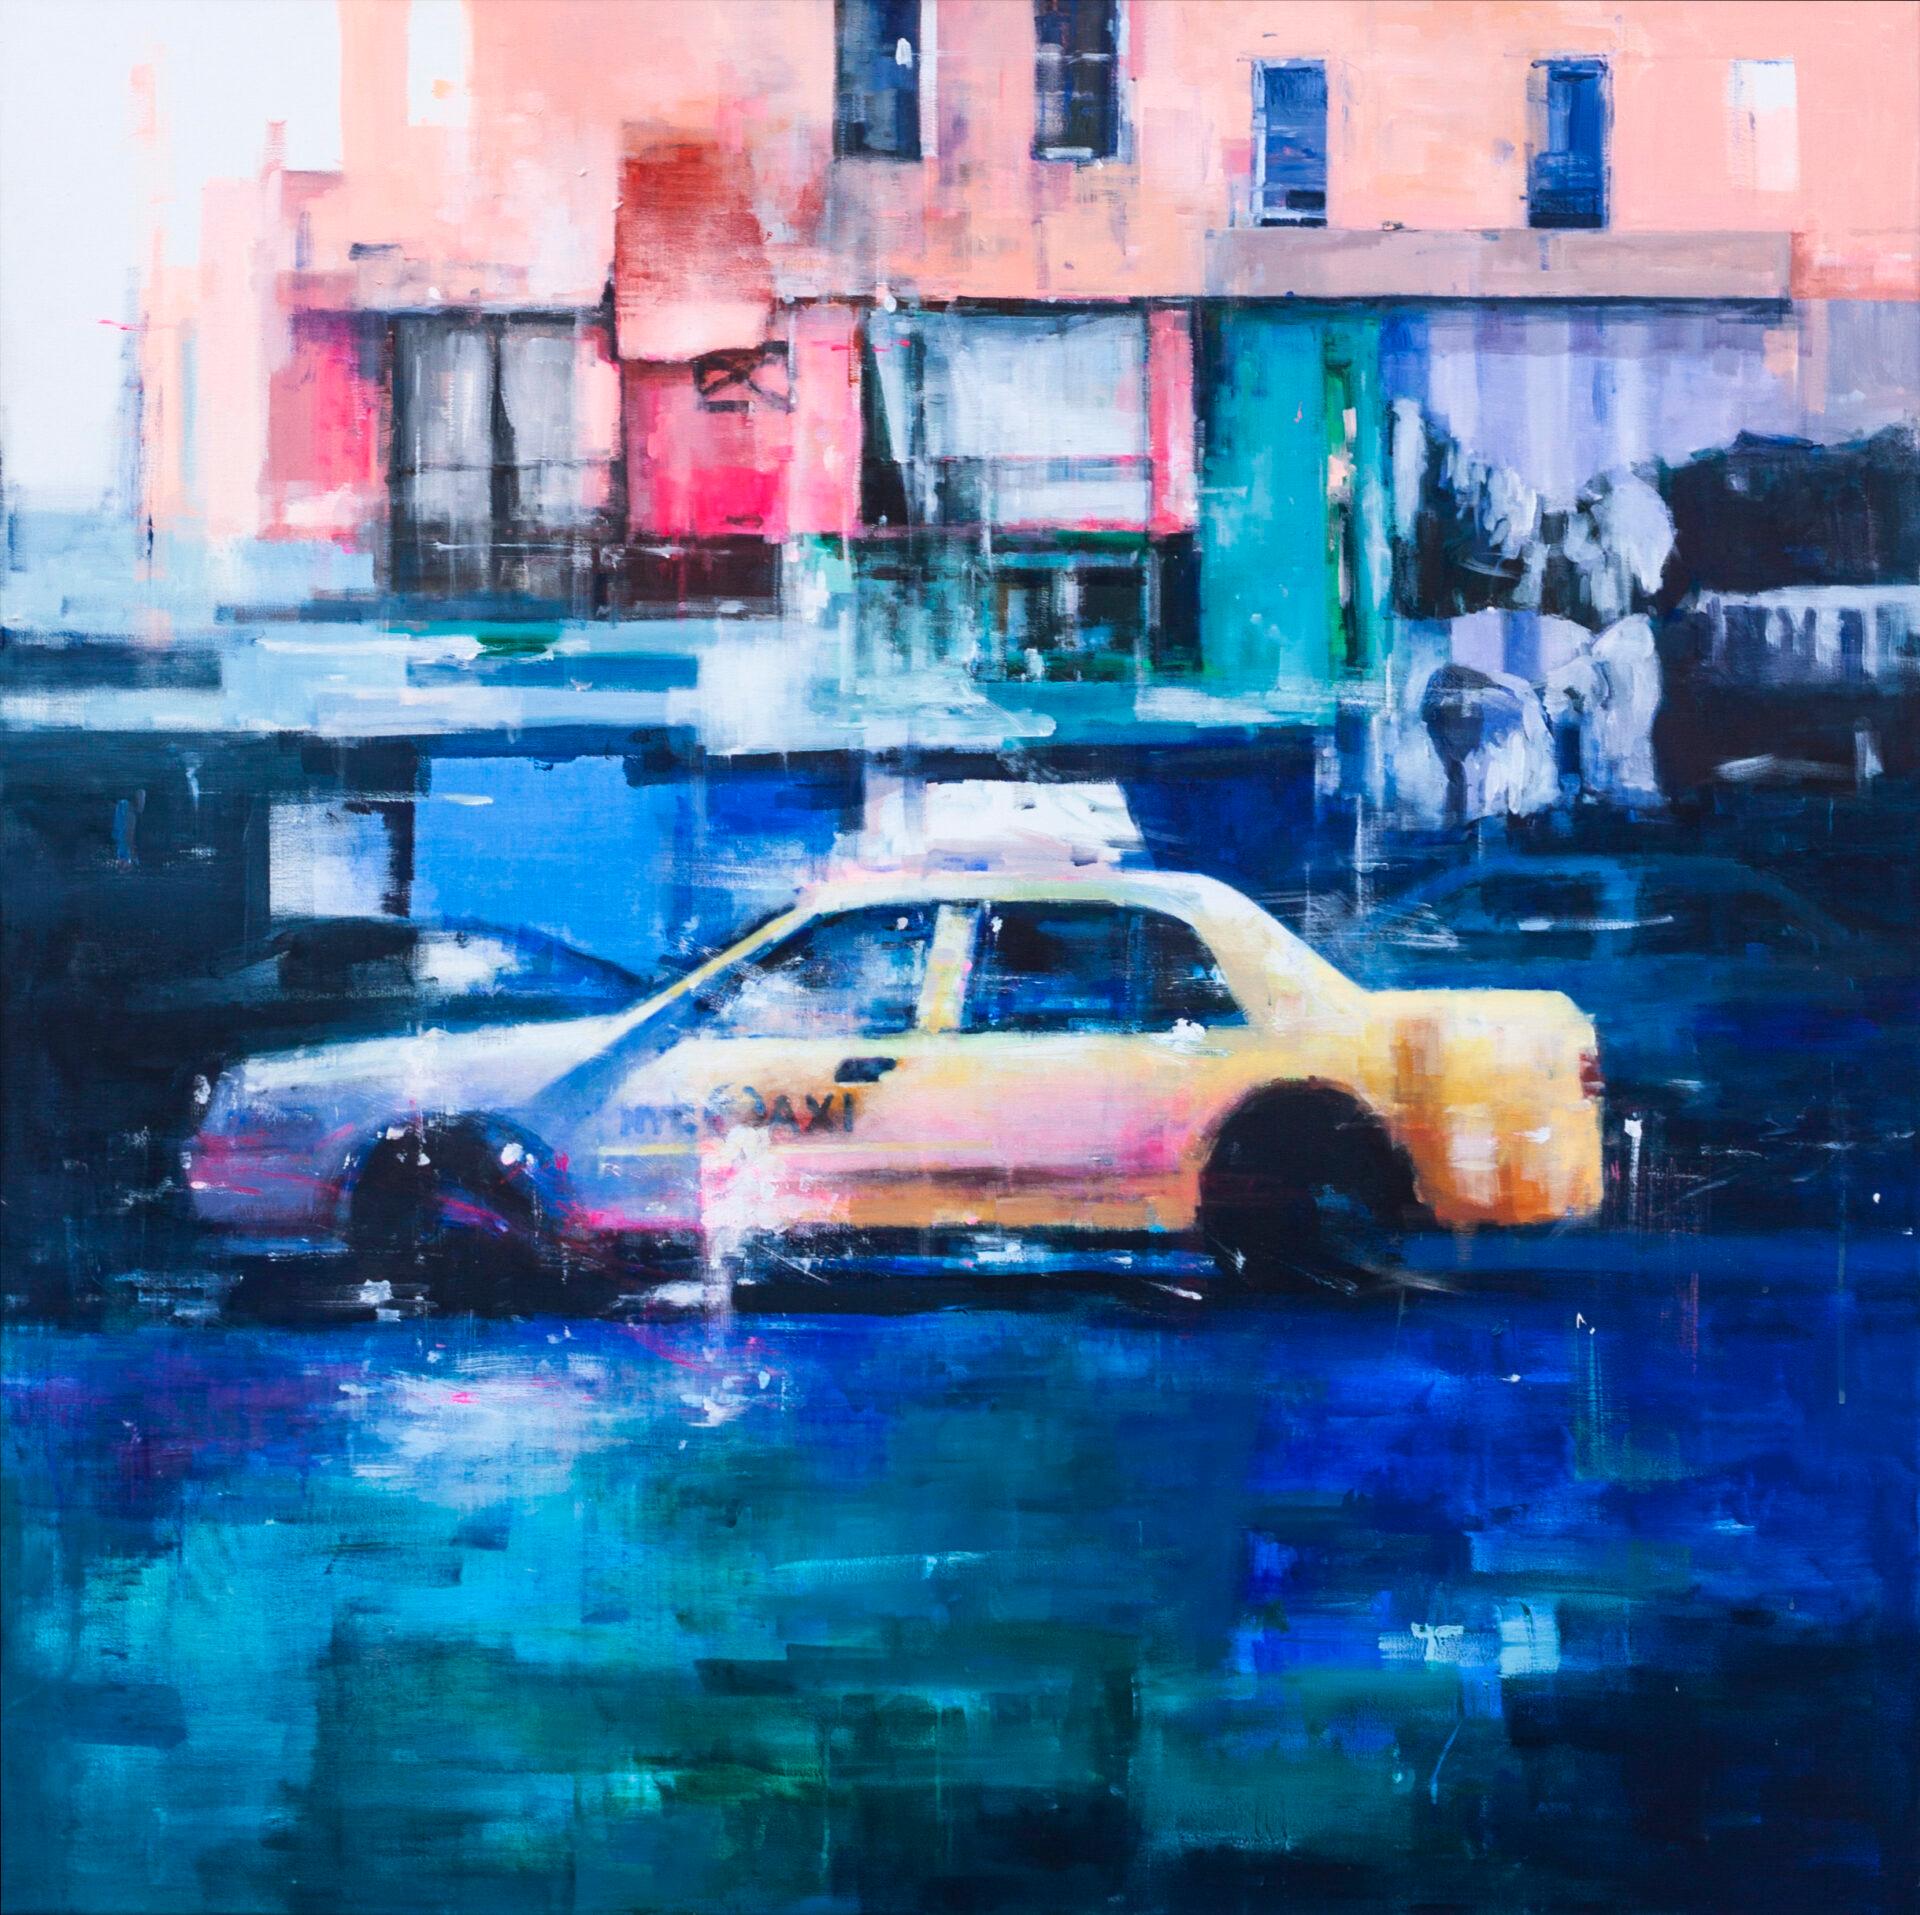 Taxi by Udatxo - Painting by Unknown